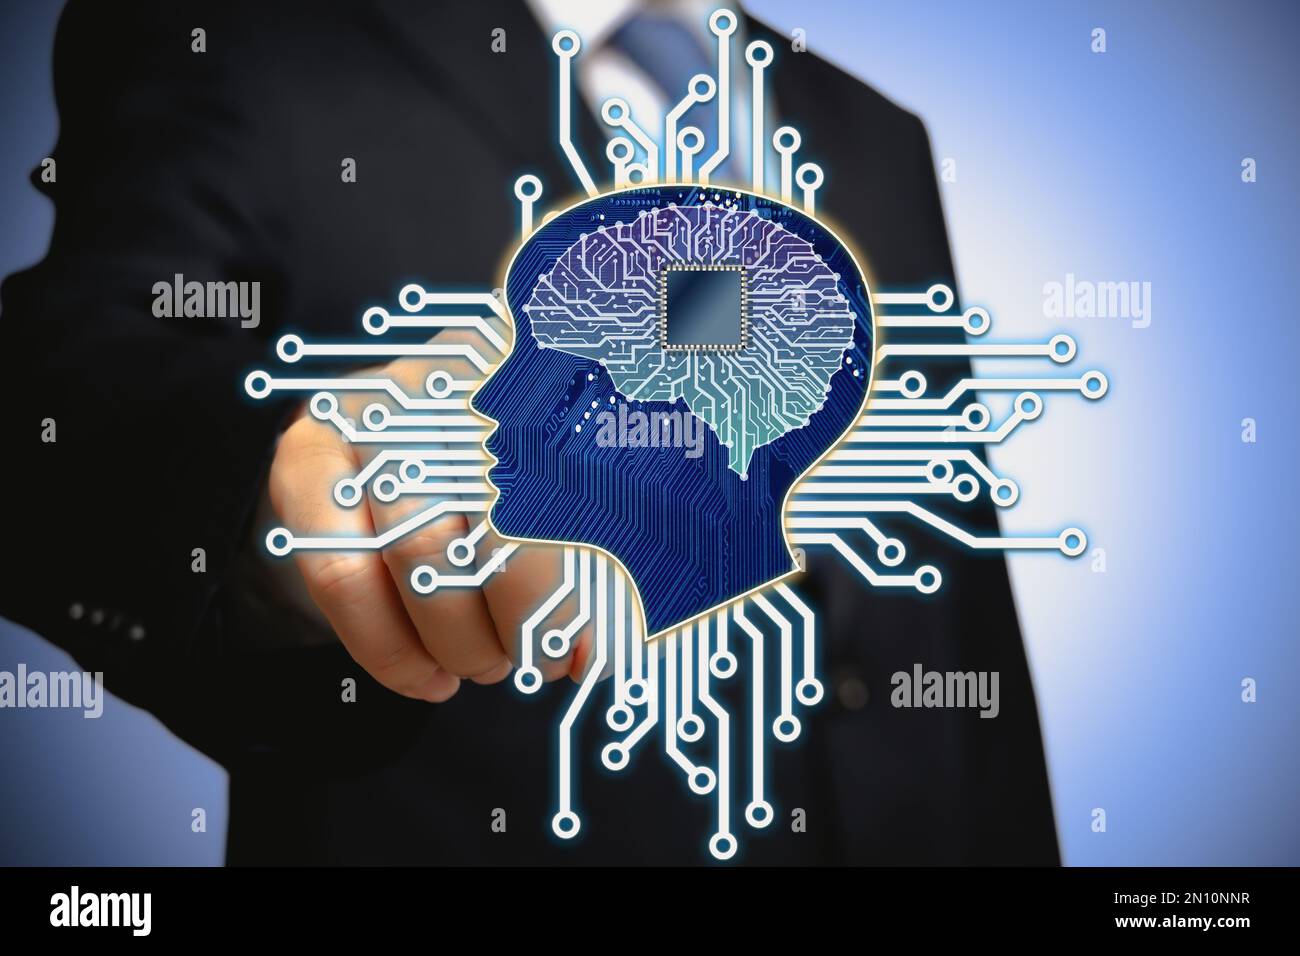 Future business concept using artificial intelligence technology Stock Photo